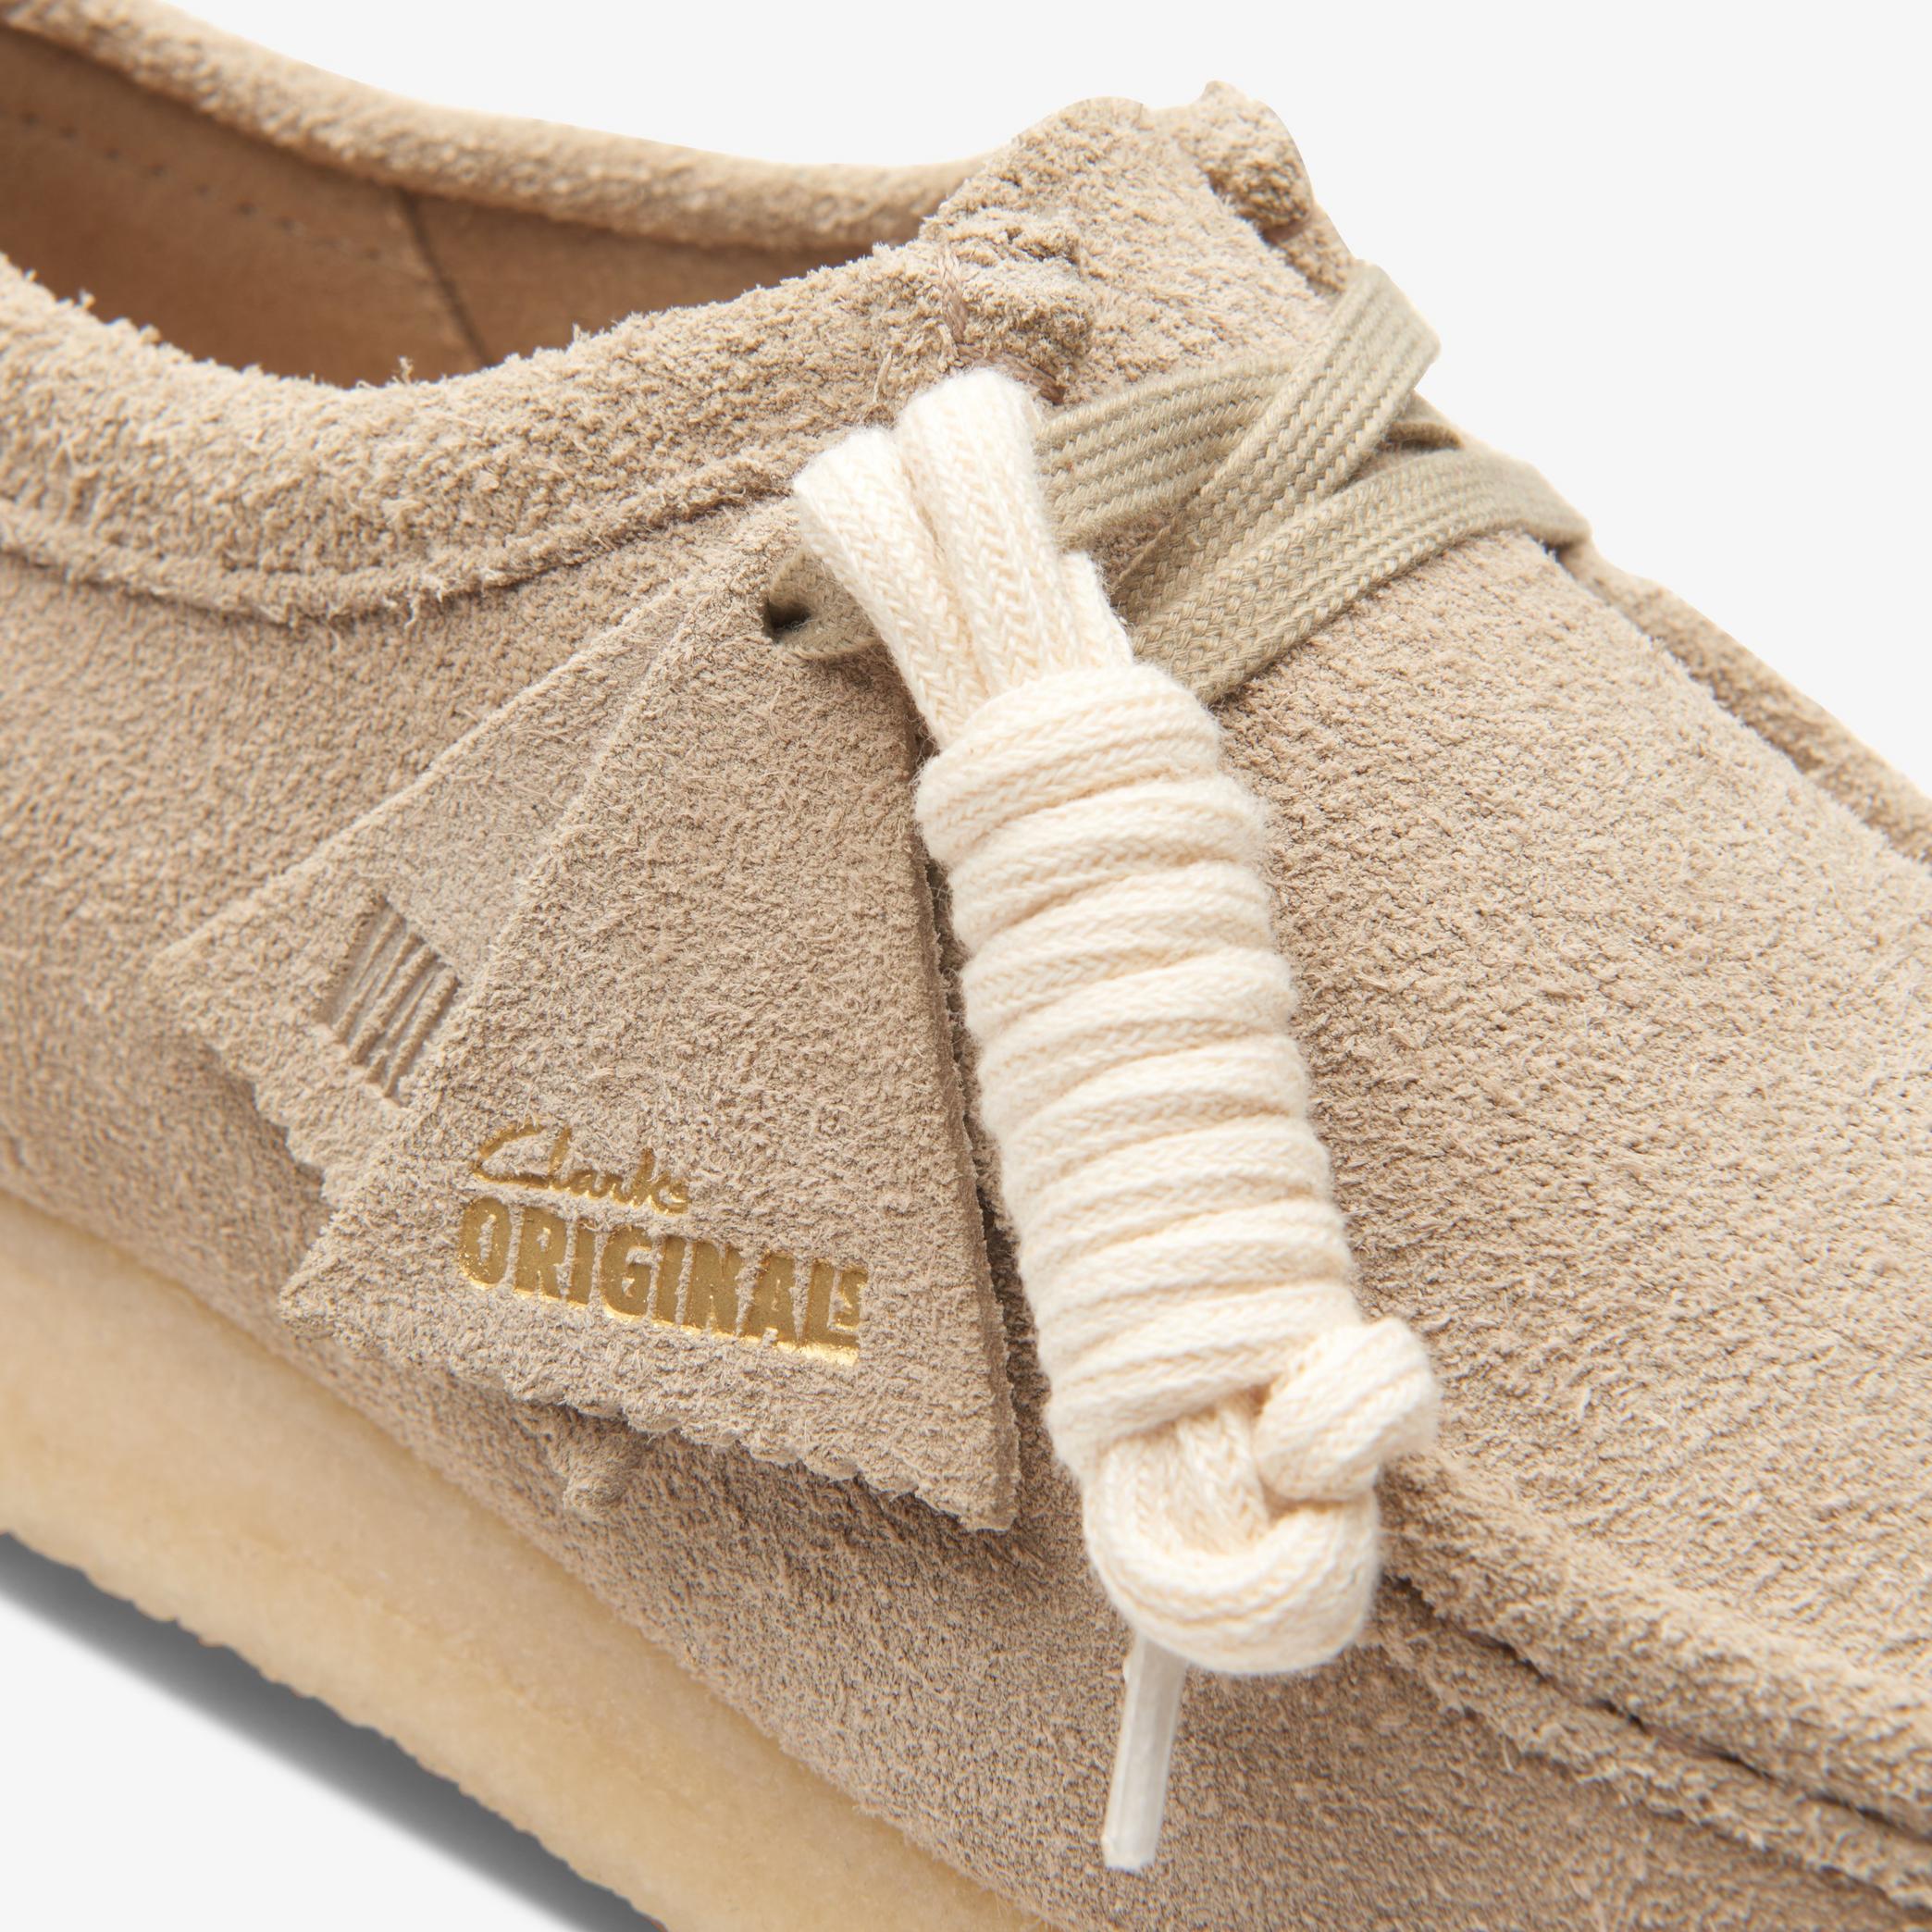 Wallabee Pale Grey Suede Wallabee, view 7 of 7